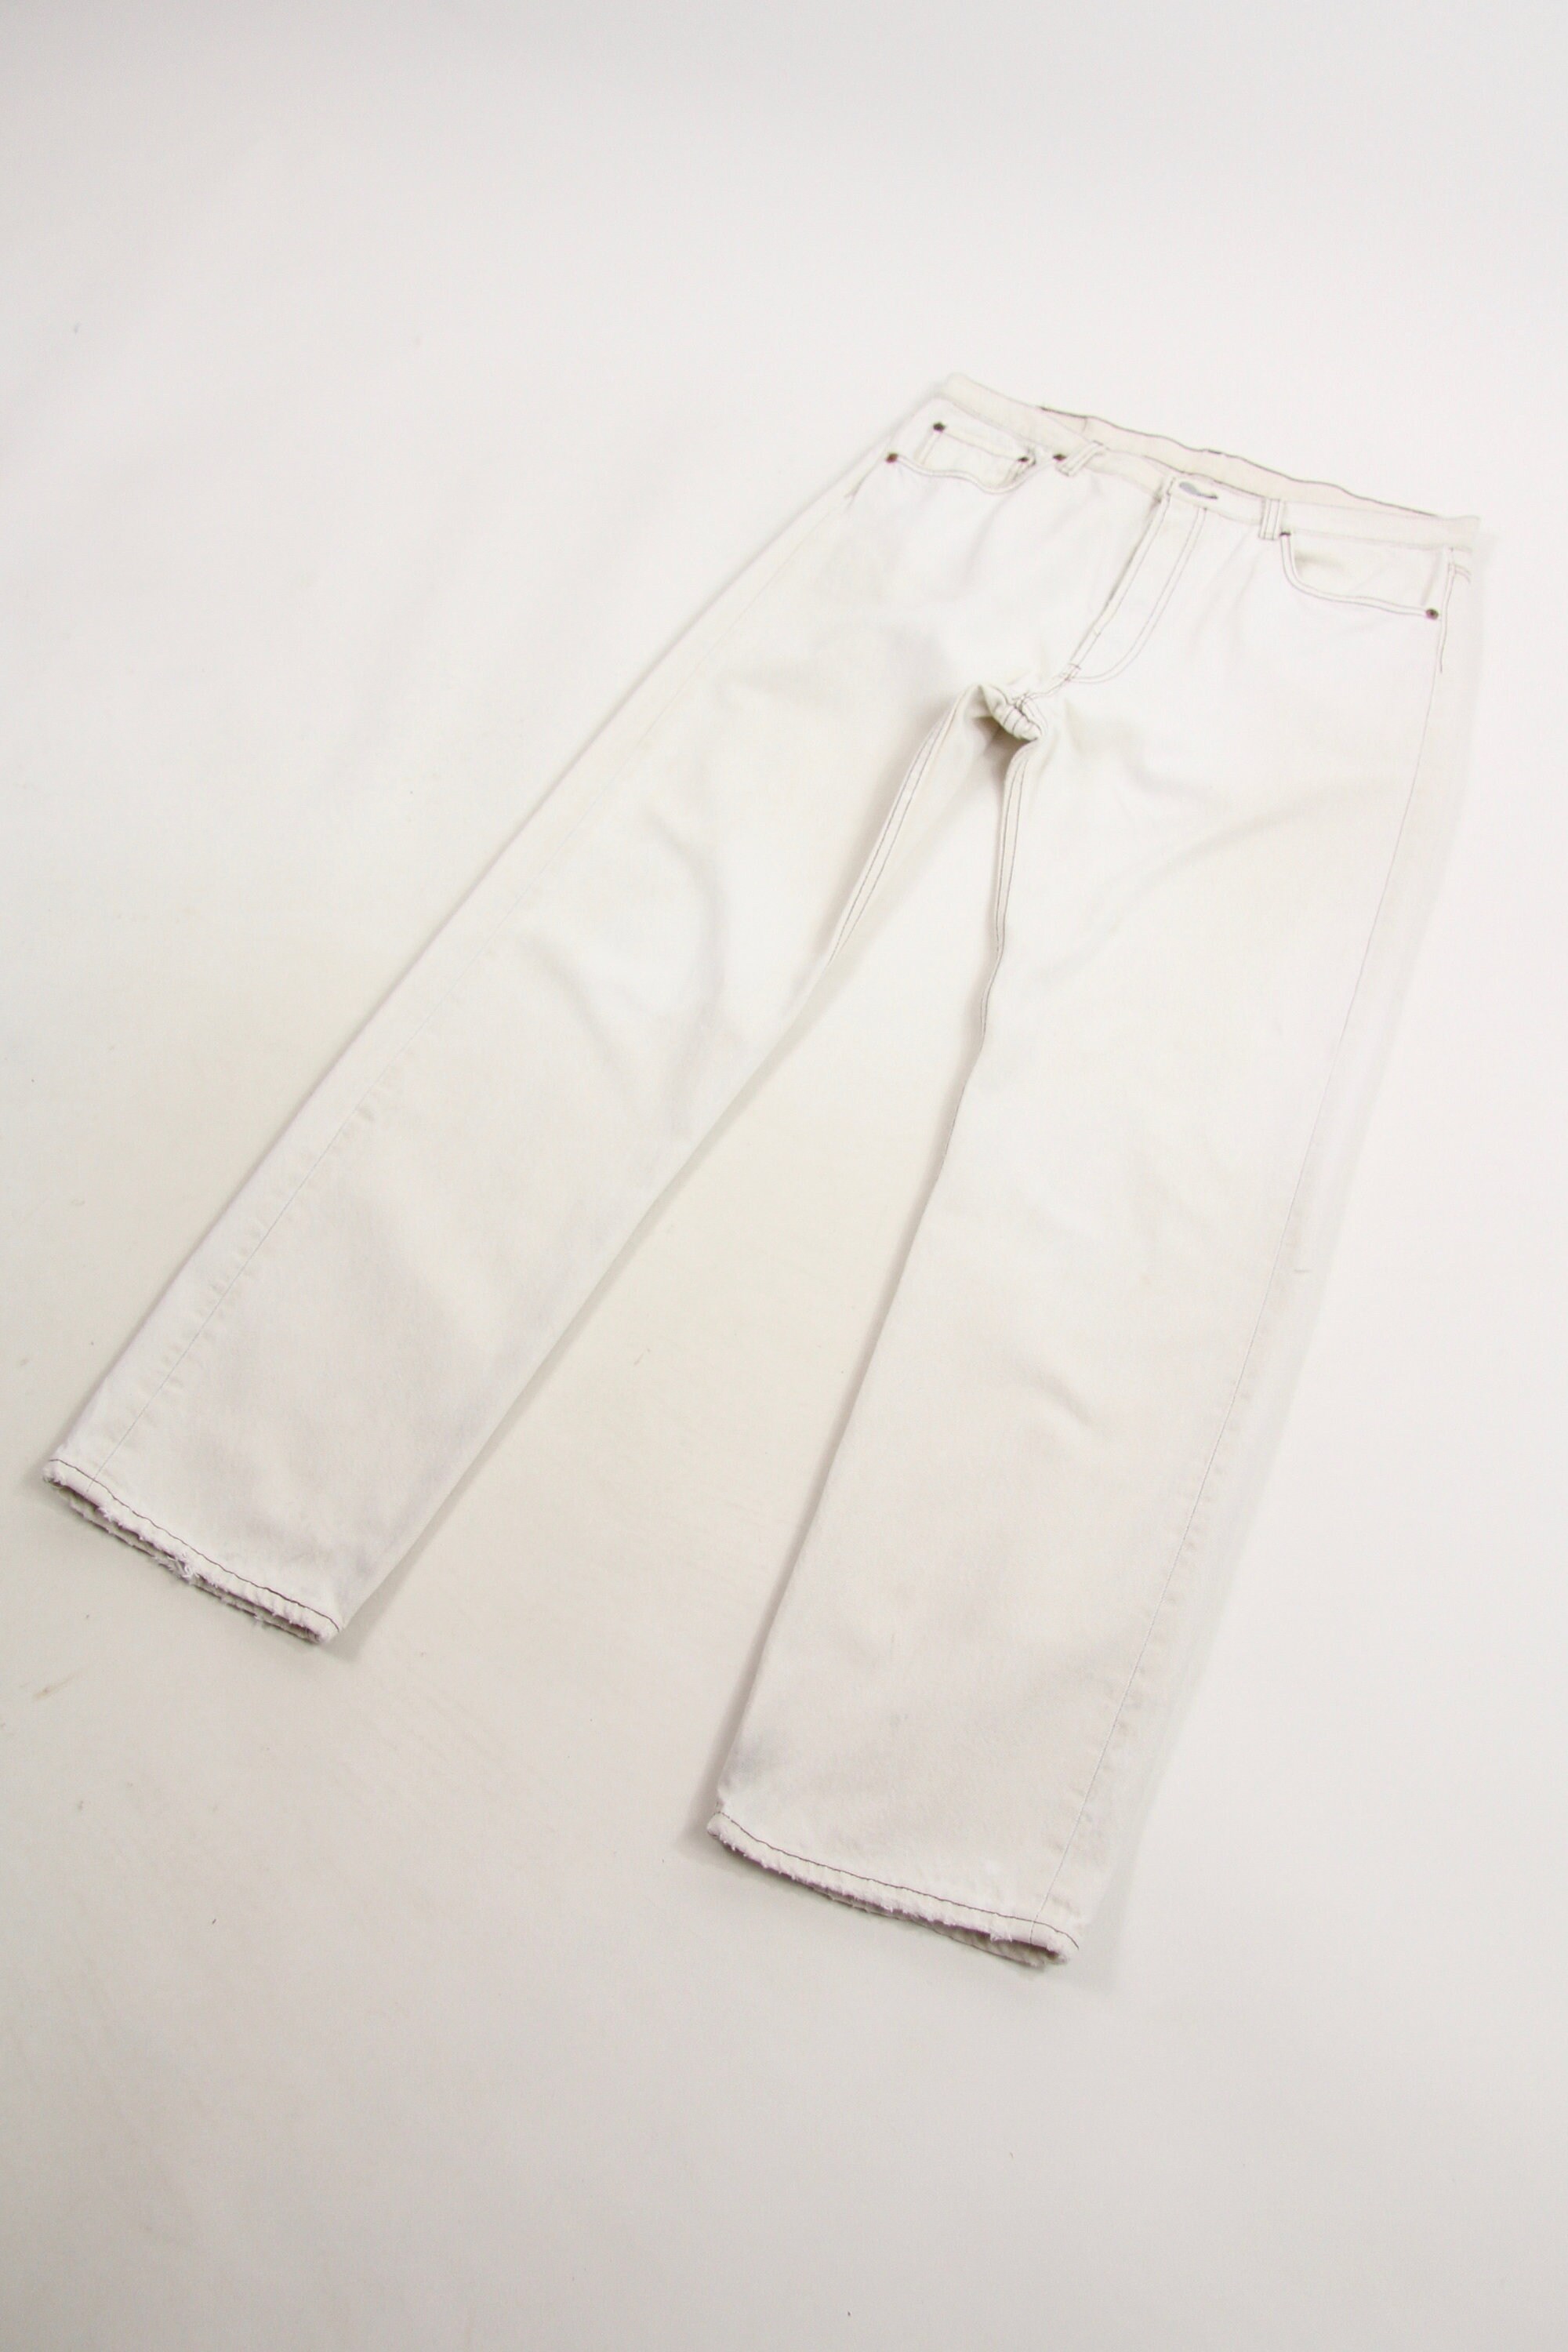 White Levi's 501 Jeans Vintage Button Fly Size 34x30.5 Made in USA